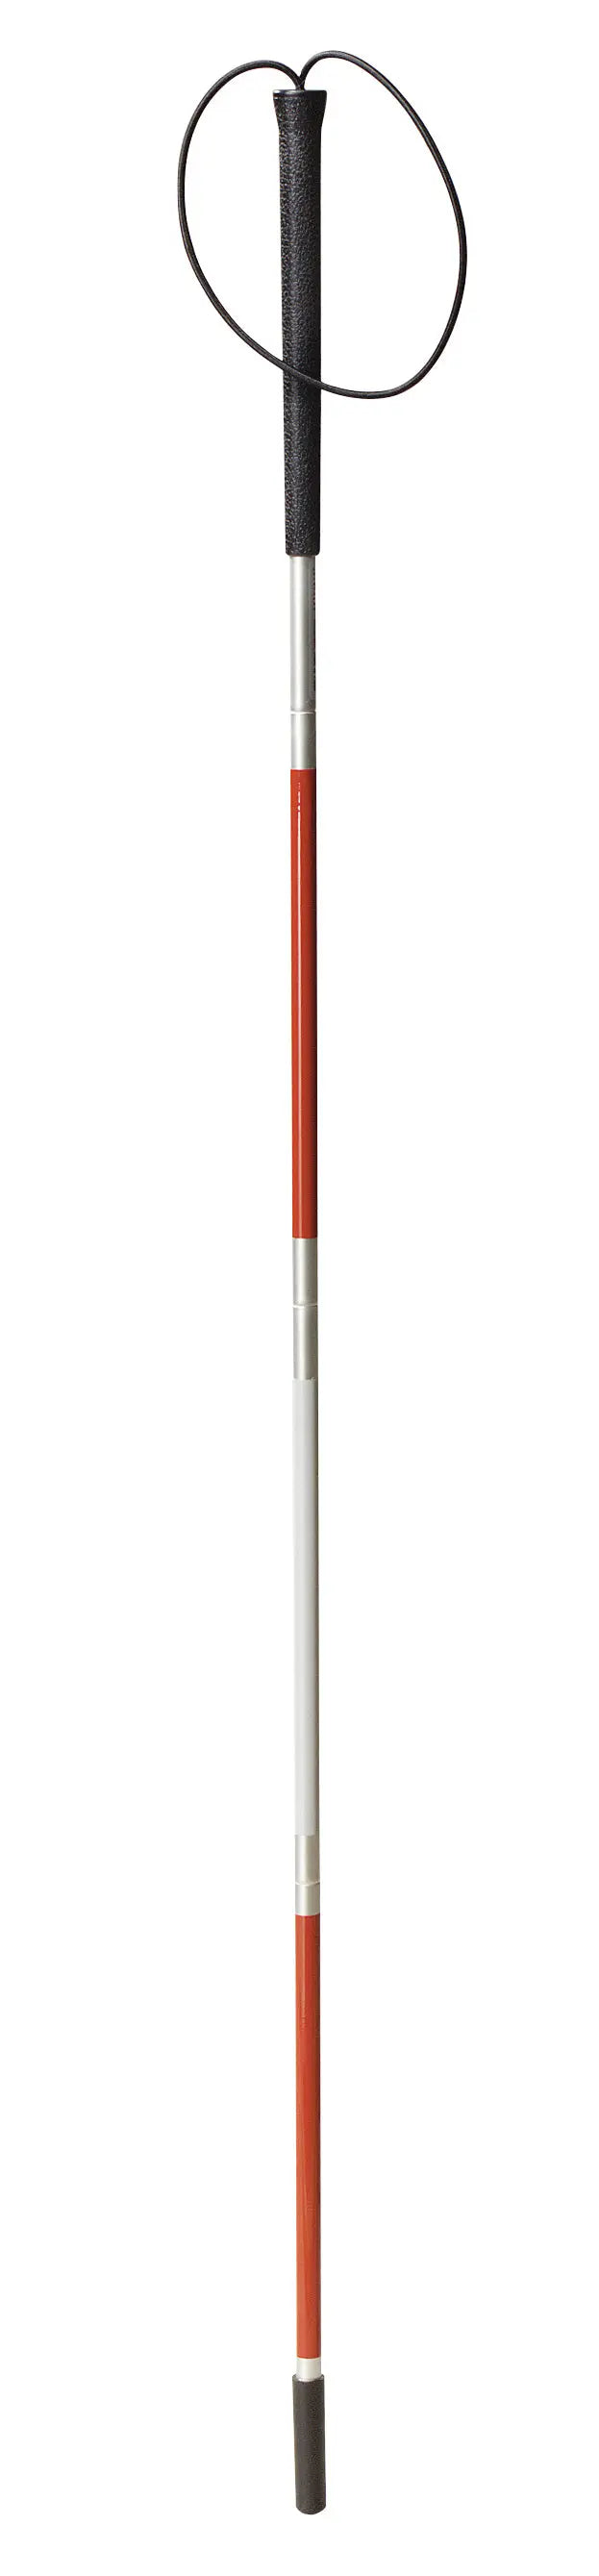 Folding Blind Cane with Wrist Strap - Home Health Store Inc